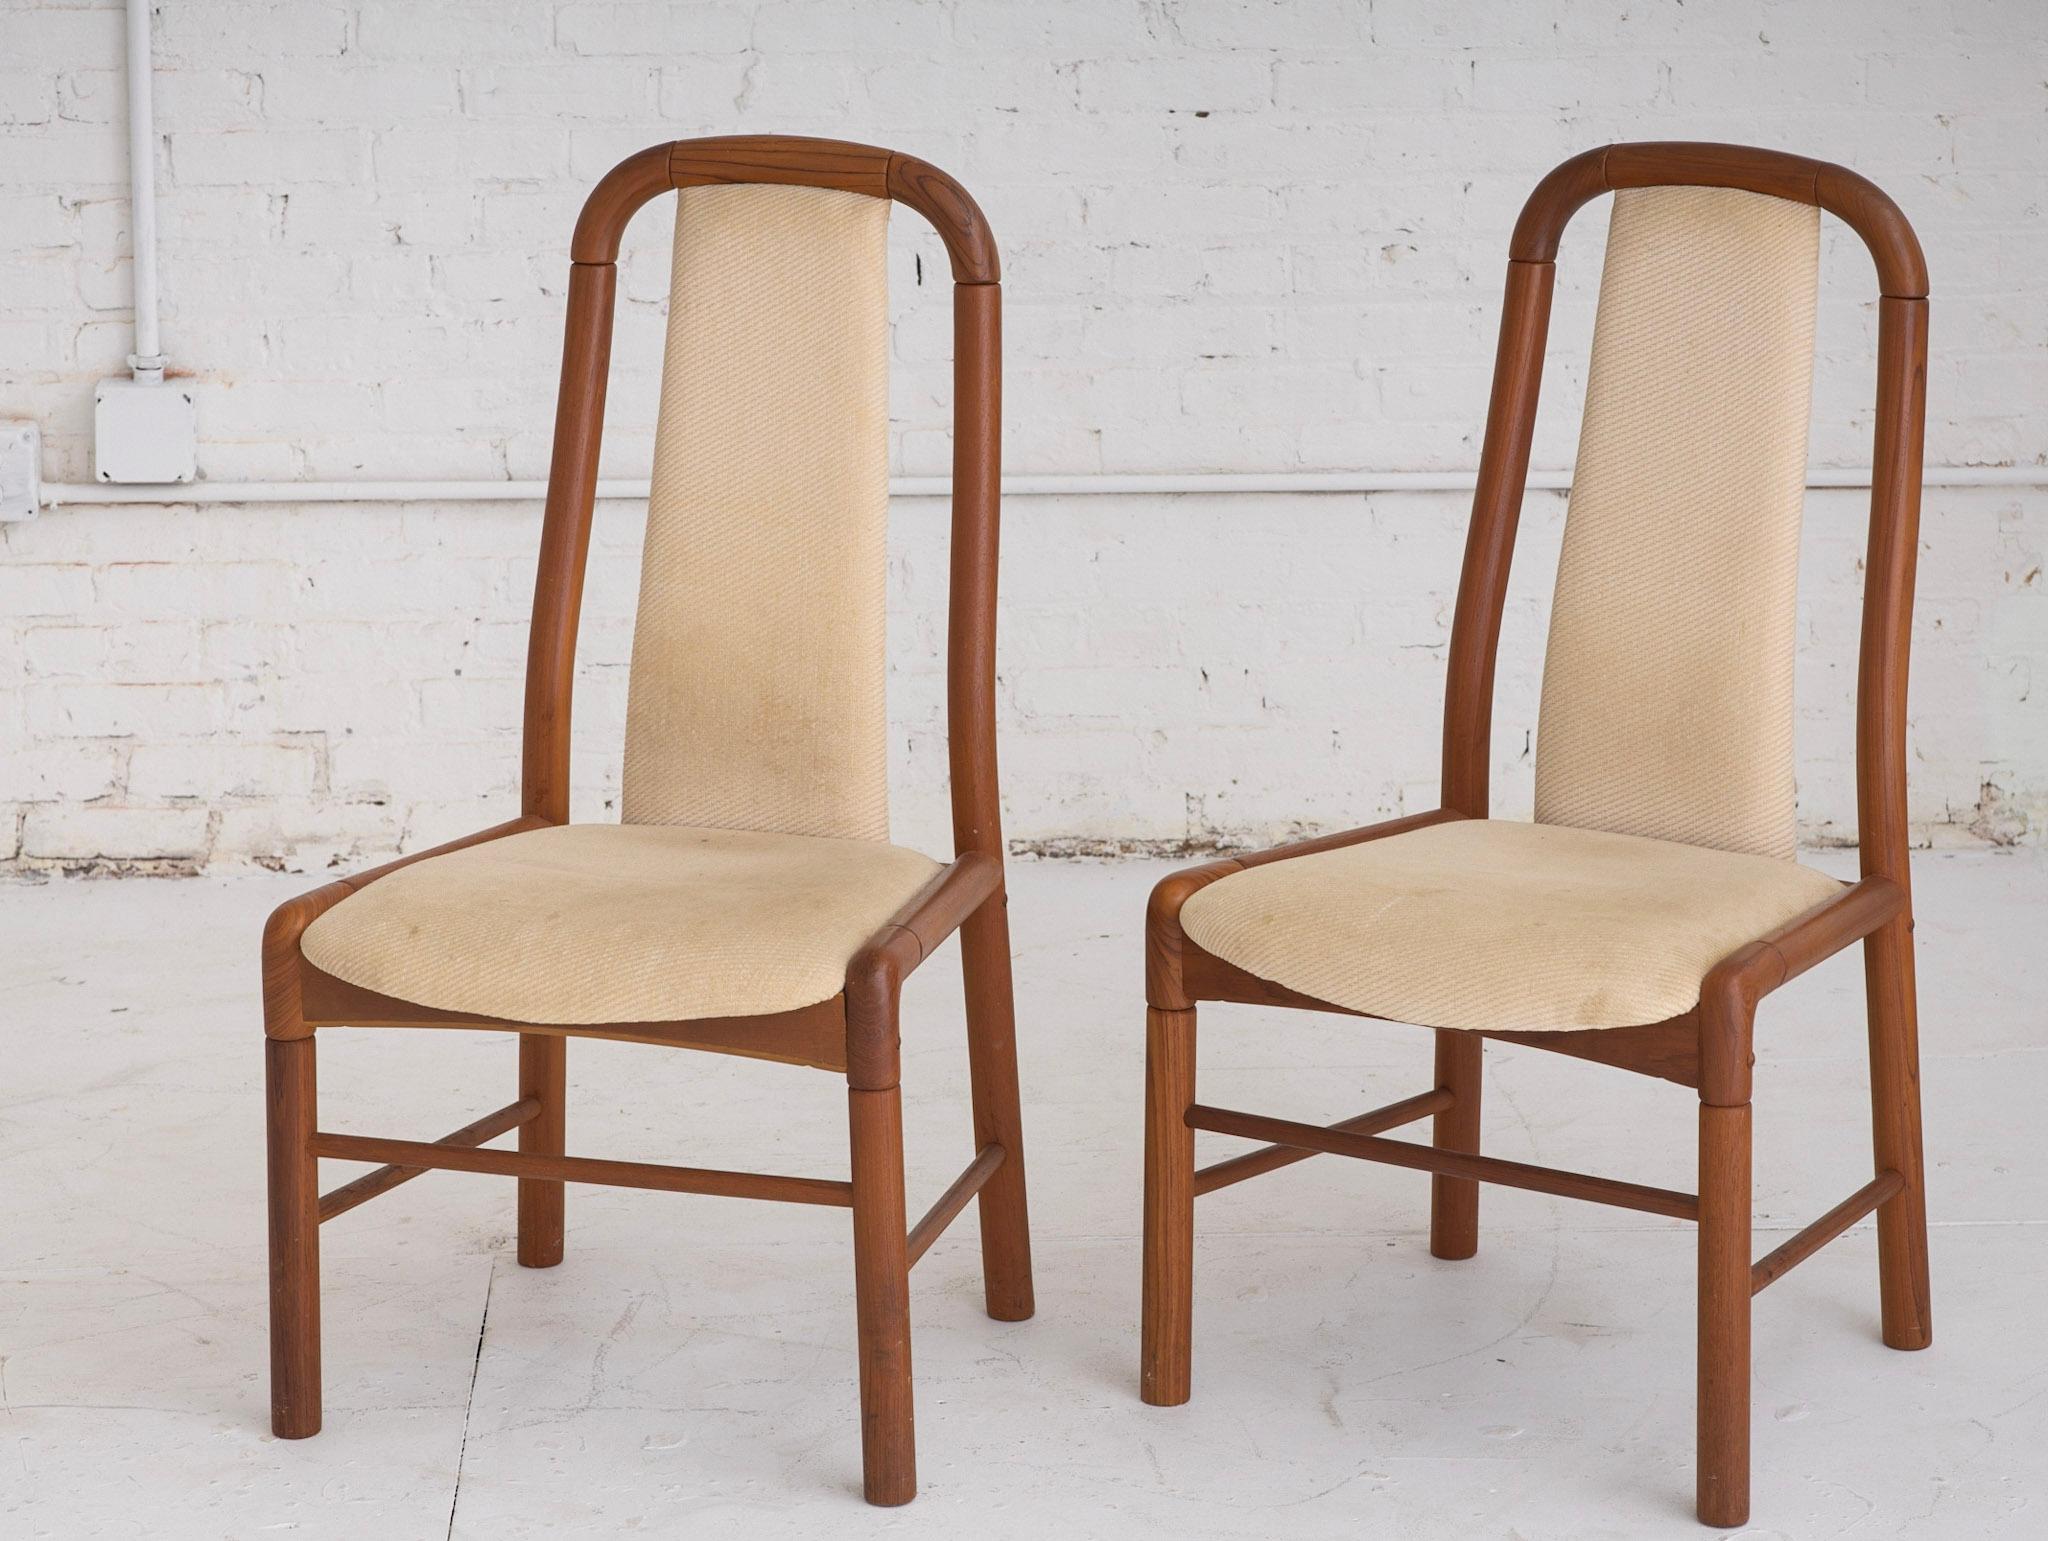 A set of 8 dining chairs from Benny Linden Design. Sculptural teak with original textured cream upholstery.